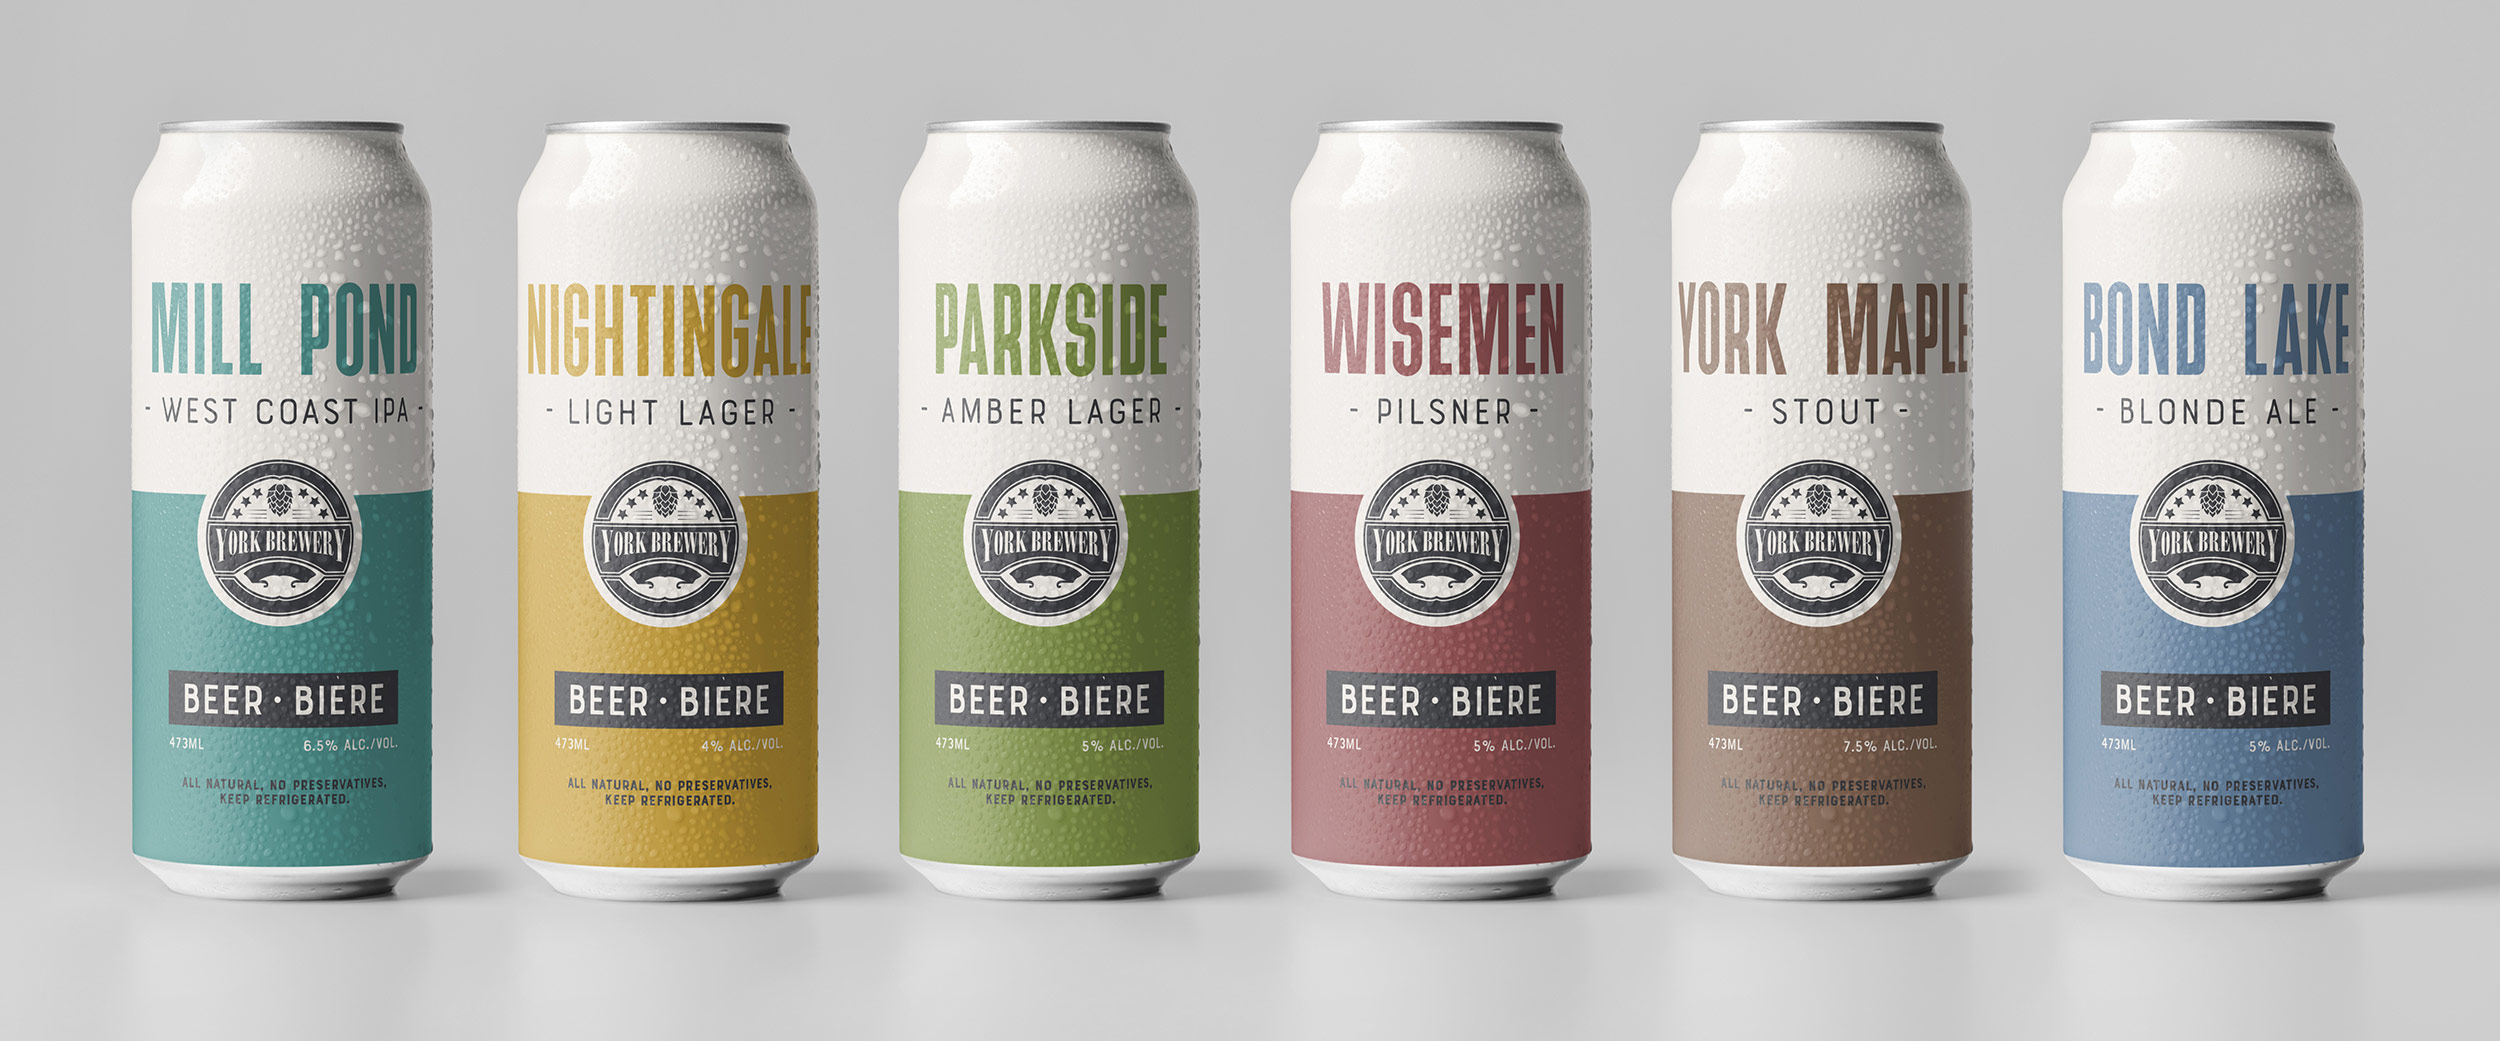 cans-group-shot-york-brewery-beer